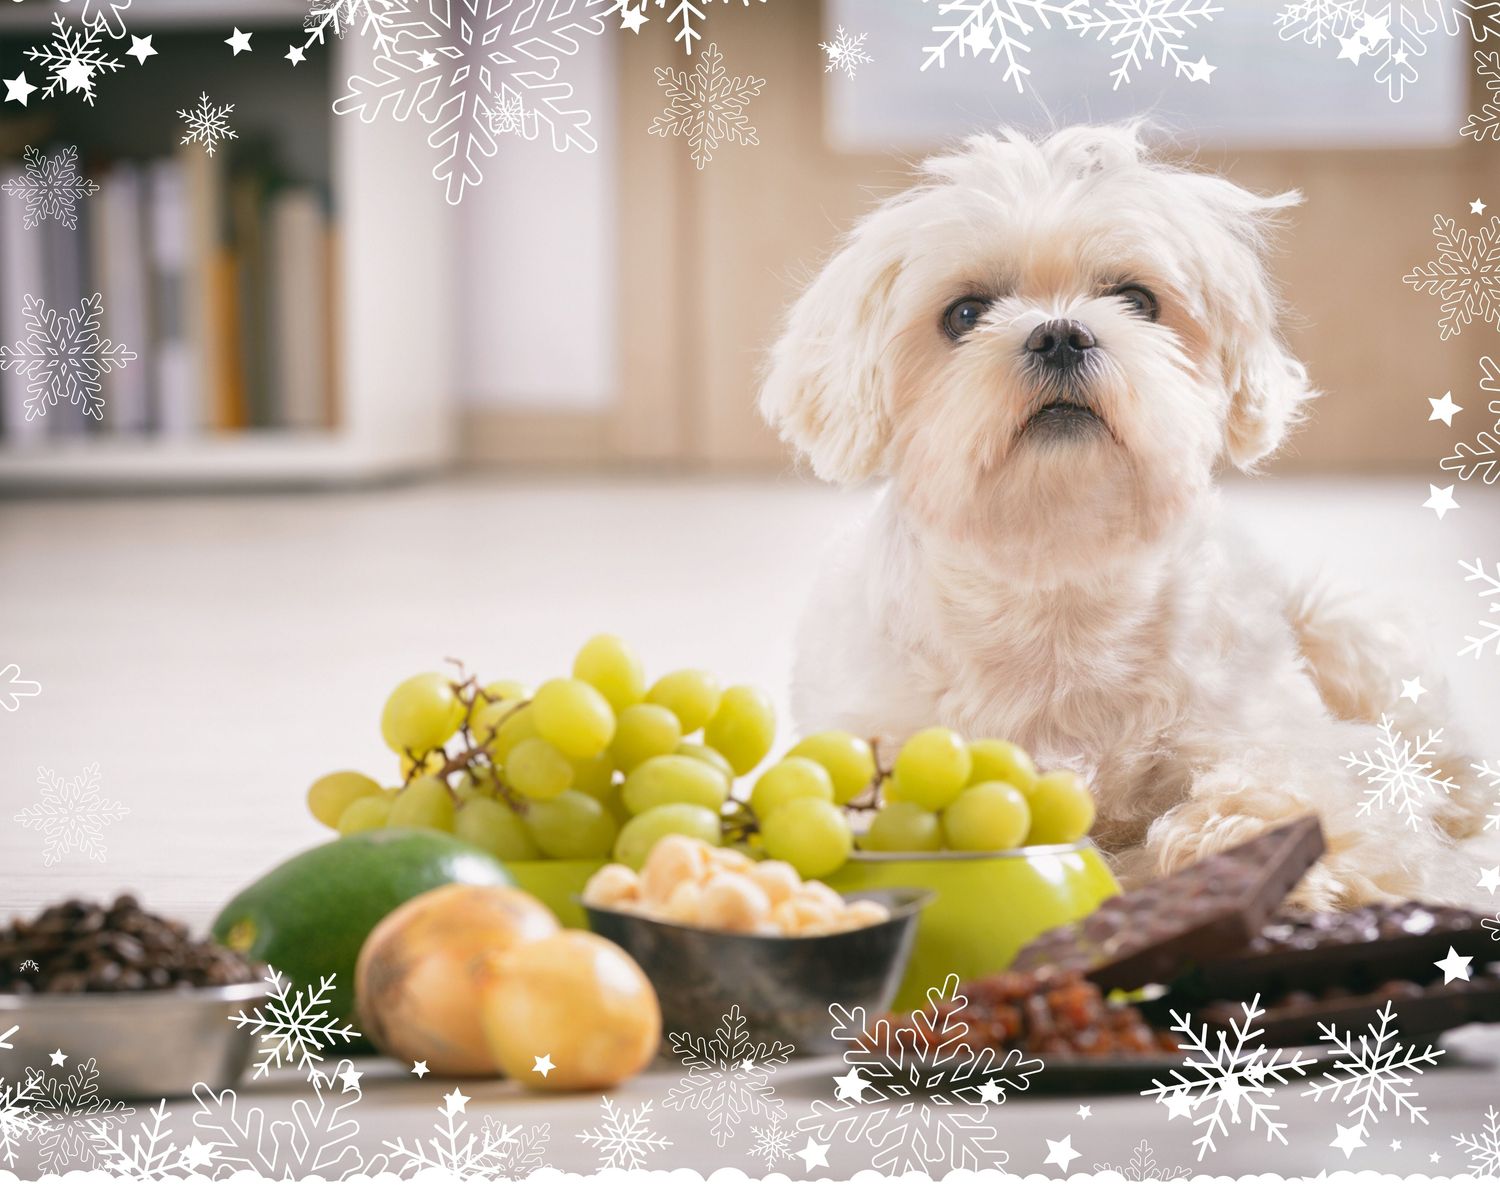 Dog with some of the foods that are toxic to our canine pals.